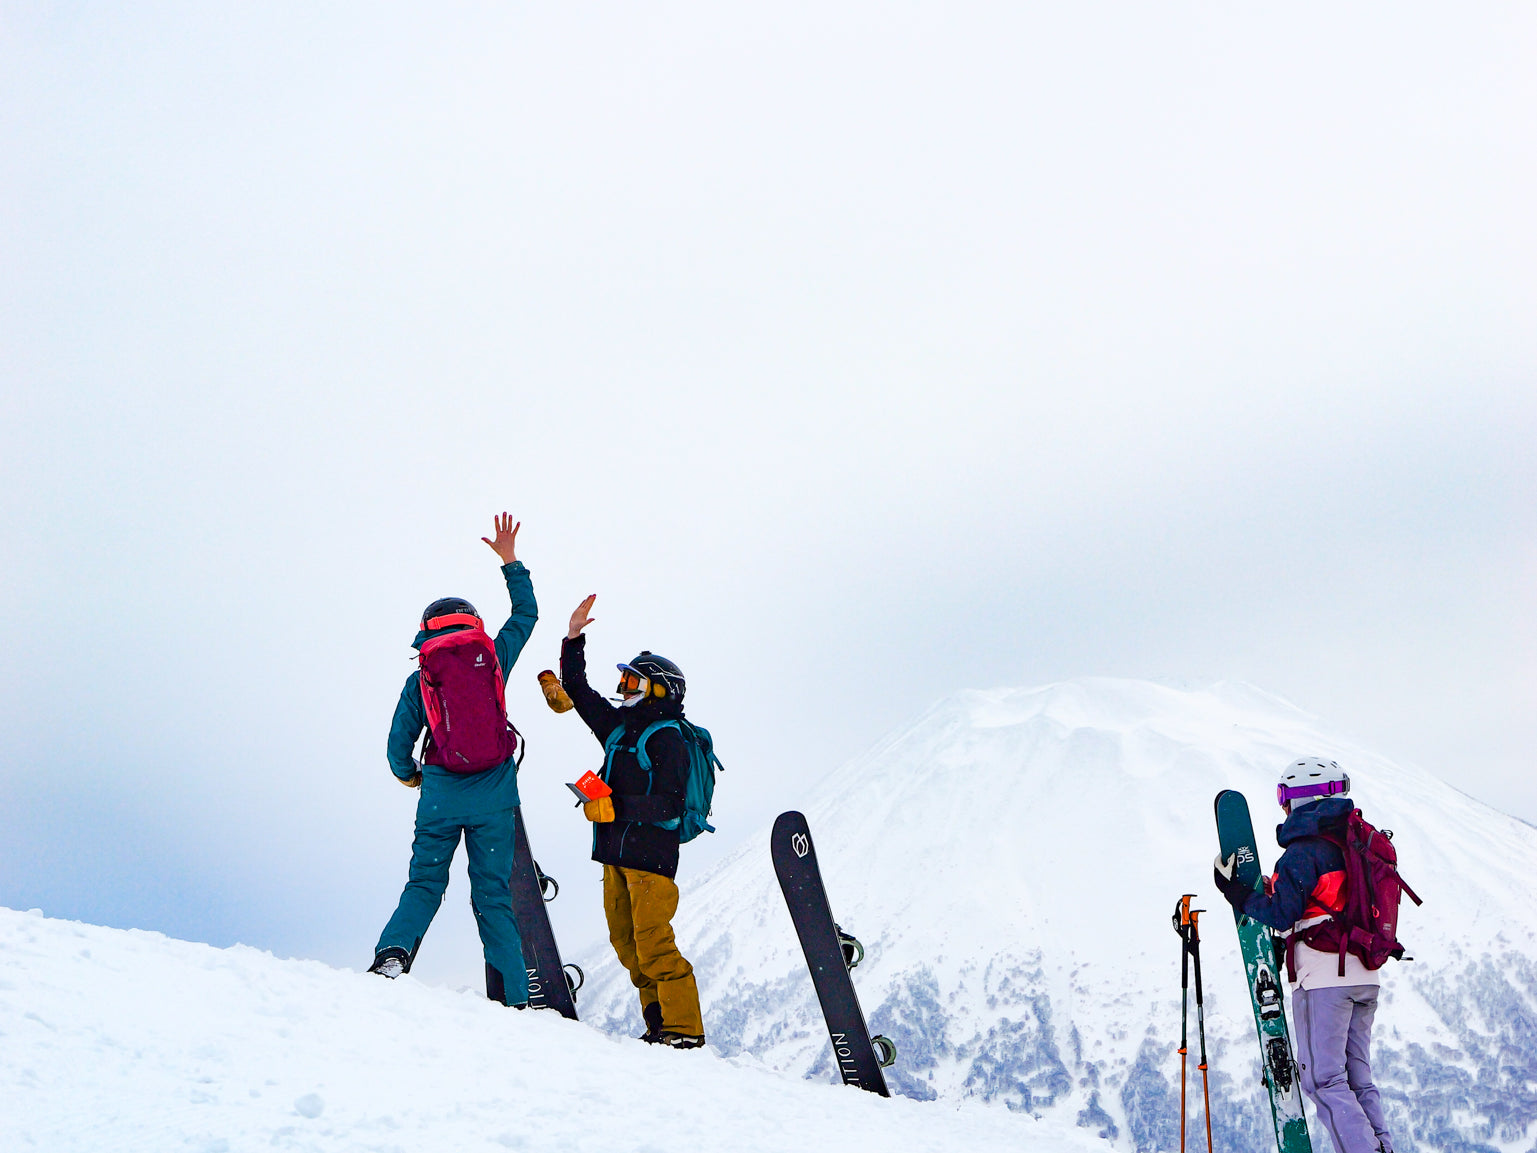 It's Not How We Ski, It's Why: Our Core Values